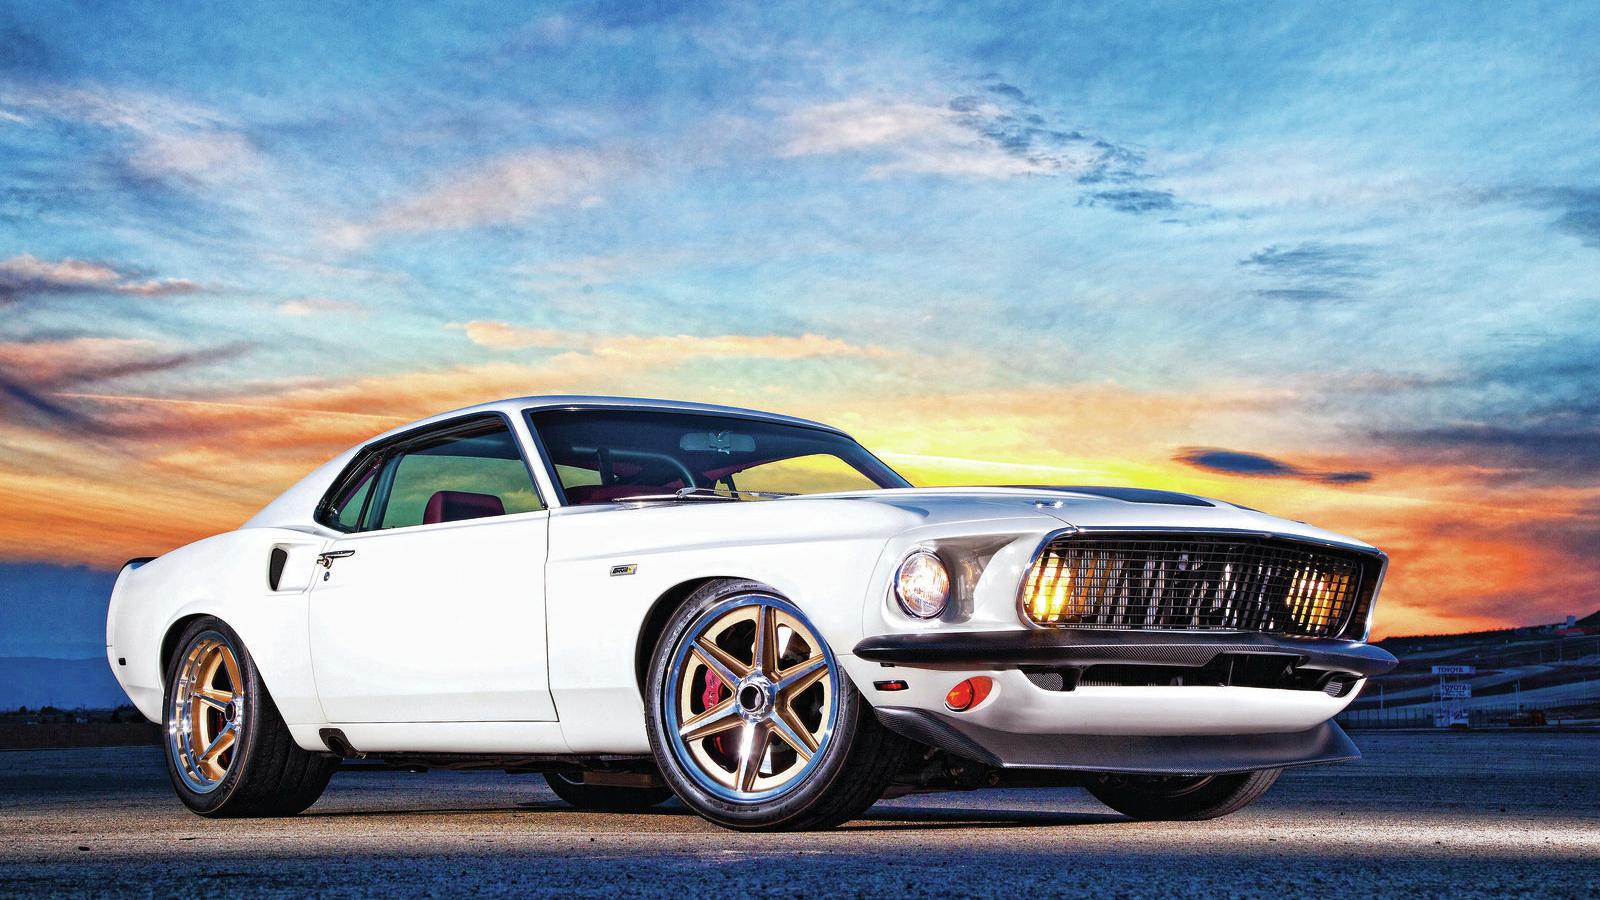 1969_ford_mustang_fnf_6_by_4wheelssociety-d8xdzlu